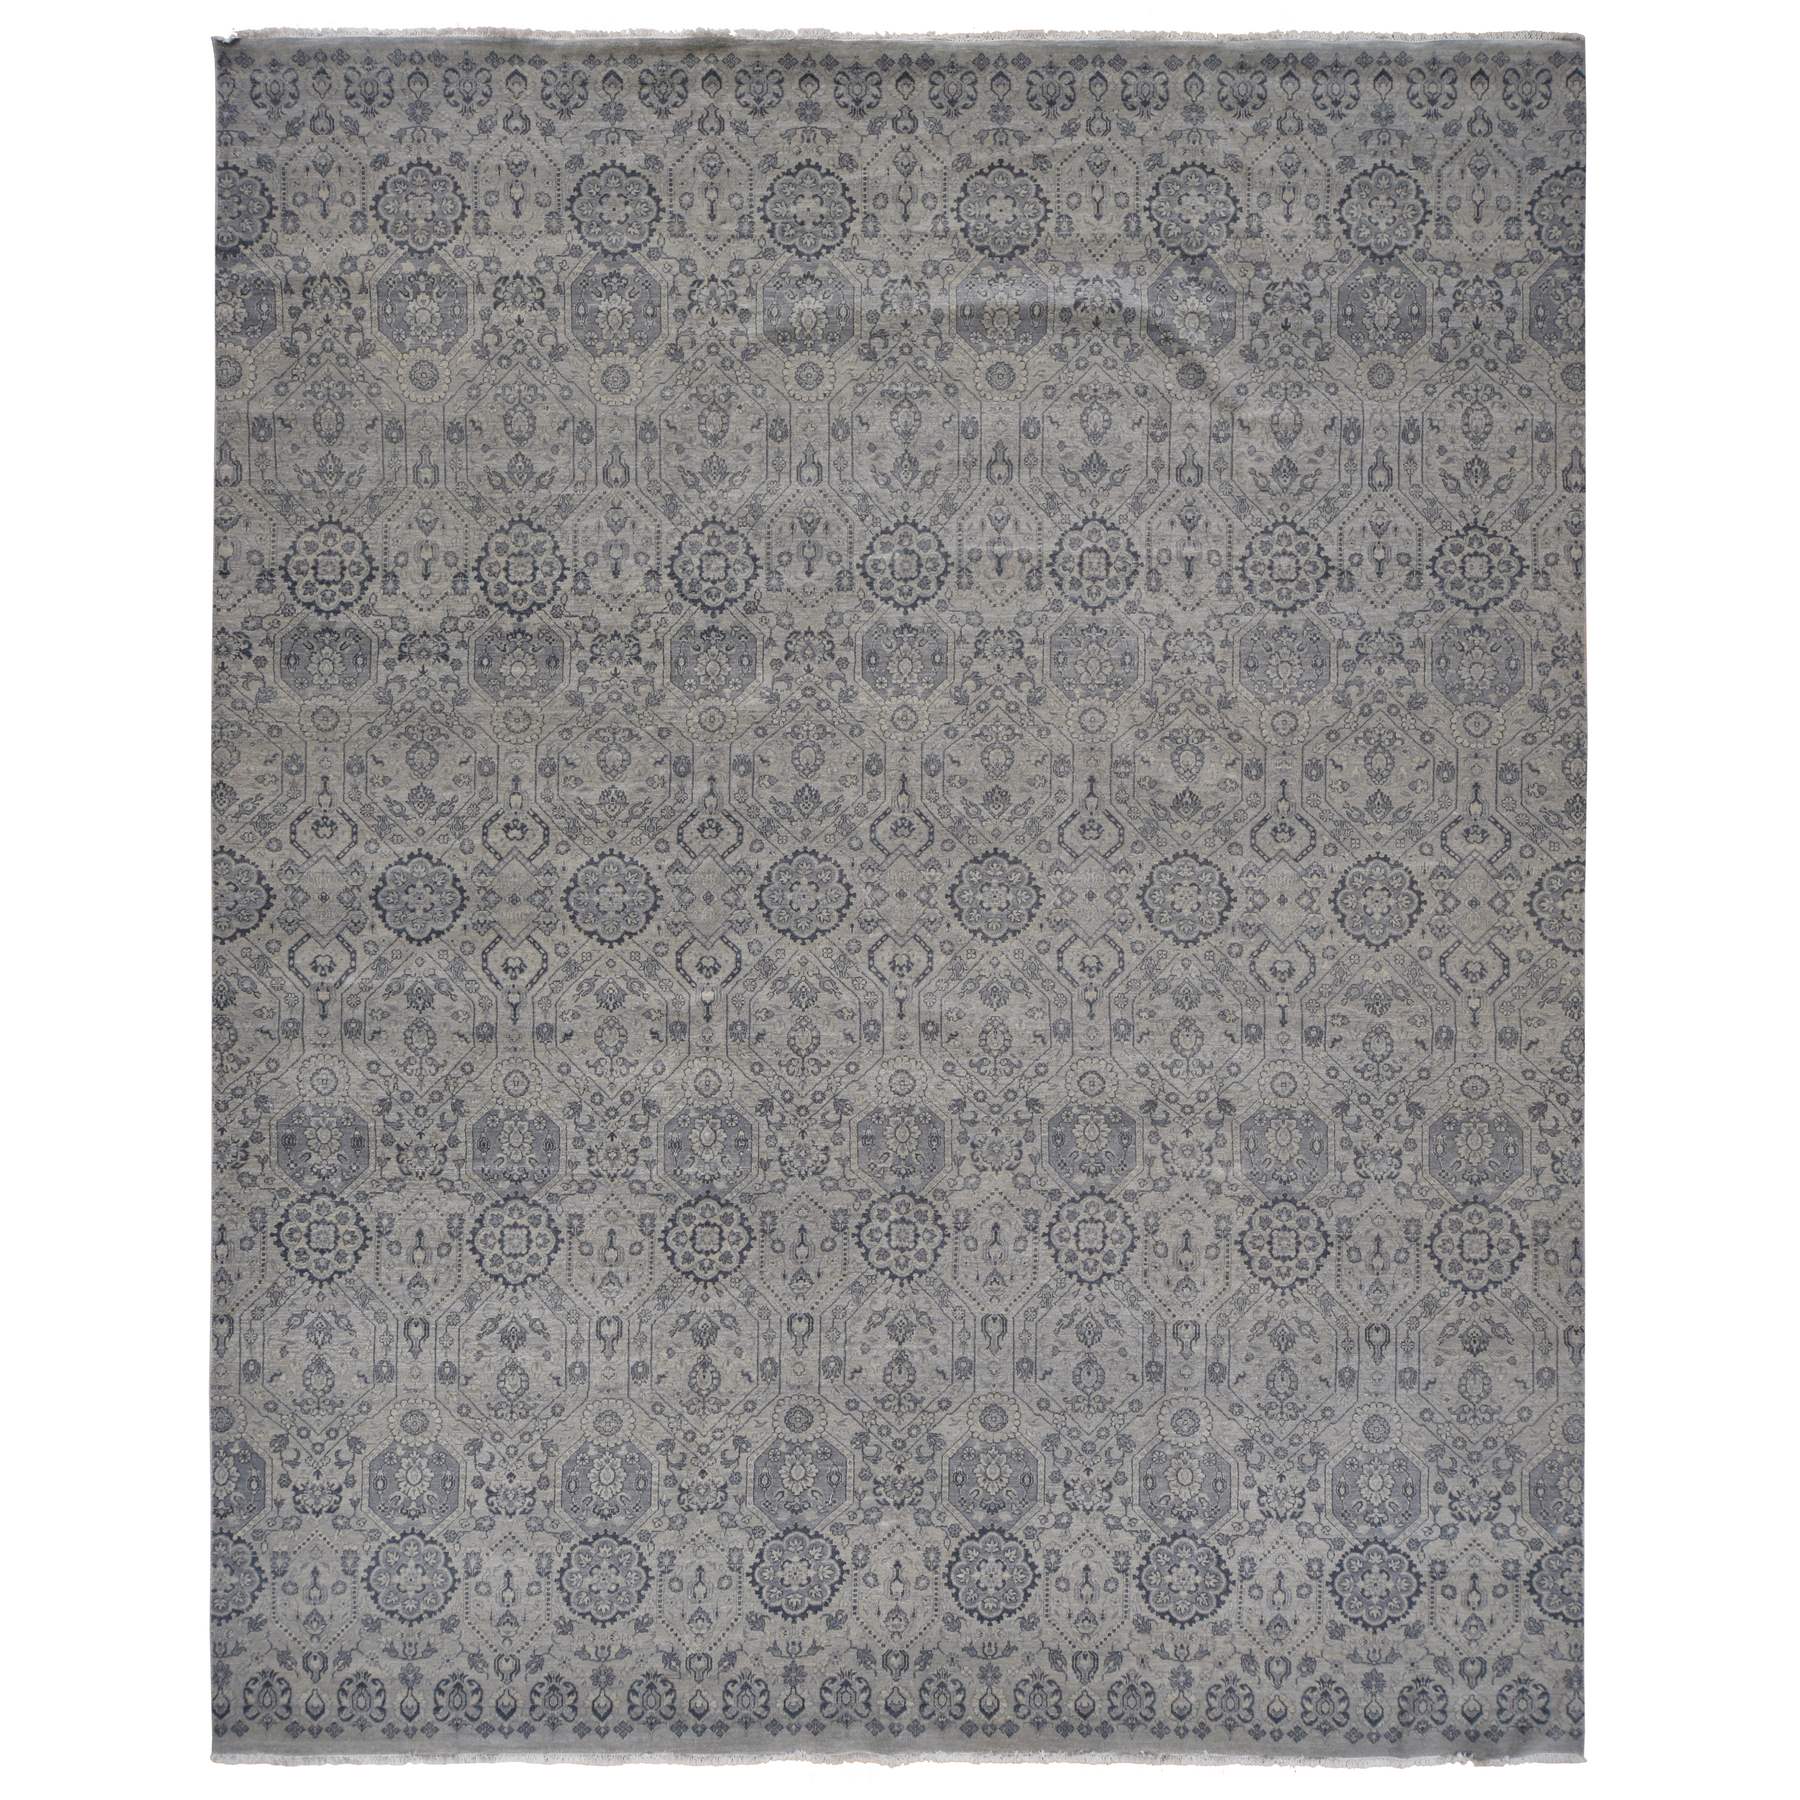  Wool Hand-Knotted Area Rug 11'10